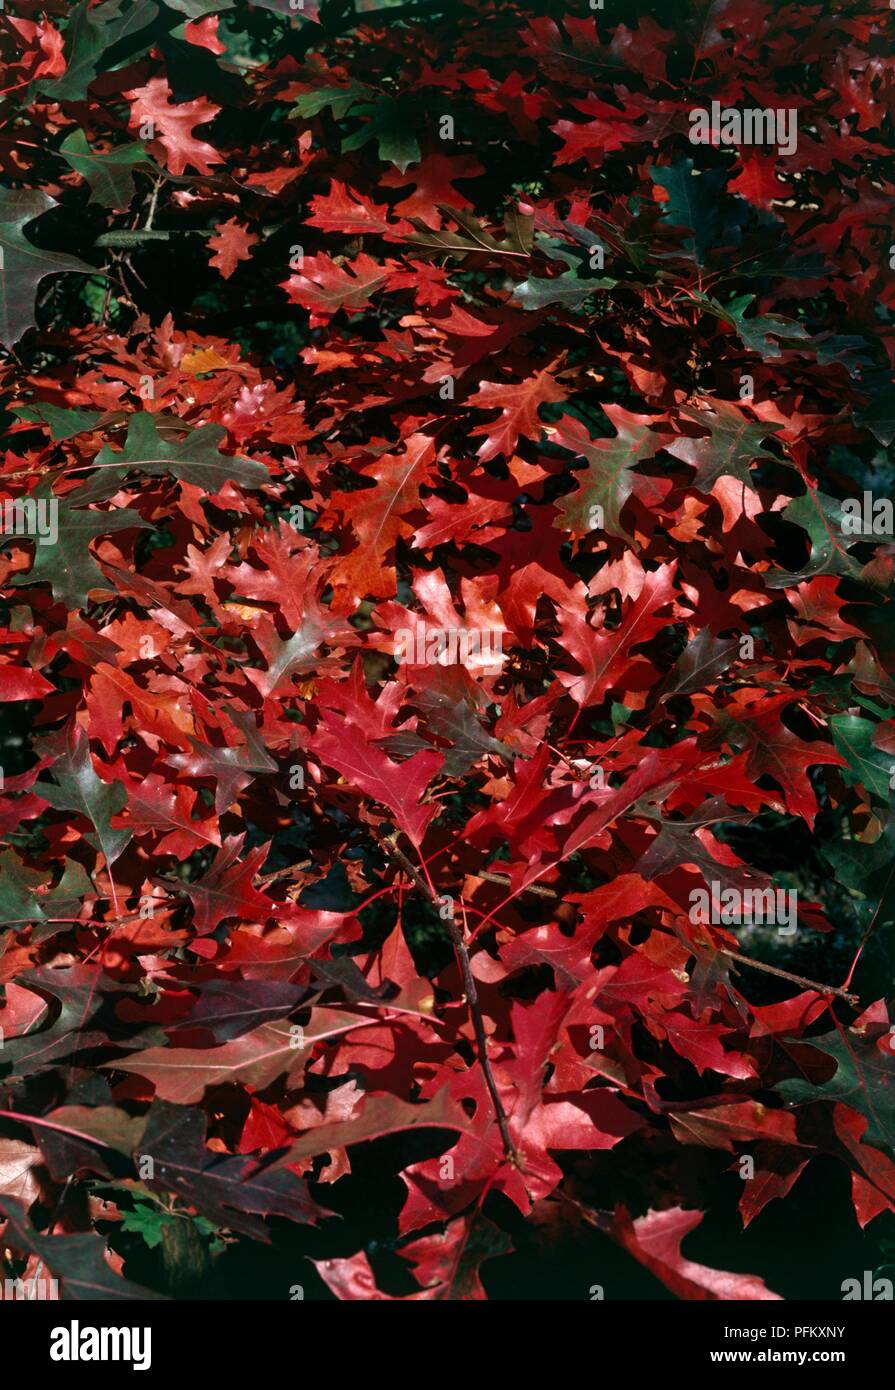 Quercus coccinea (Scarlet Oak) with red leaves changing from green in autumn Stock Photo